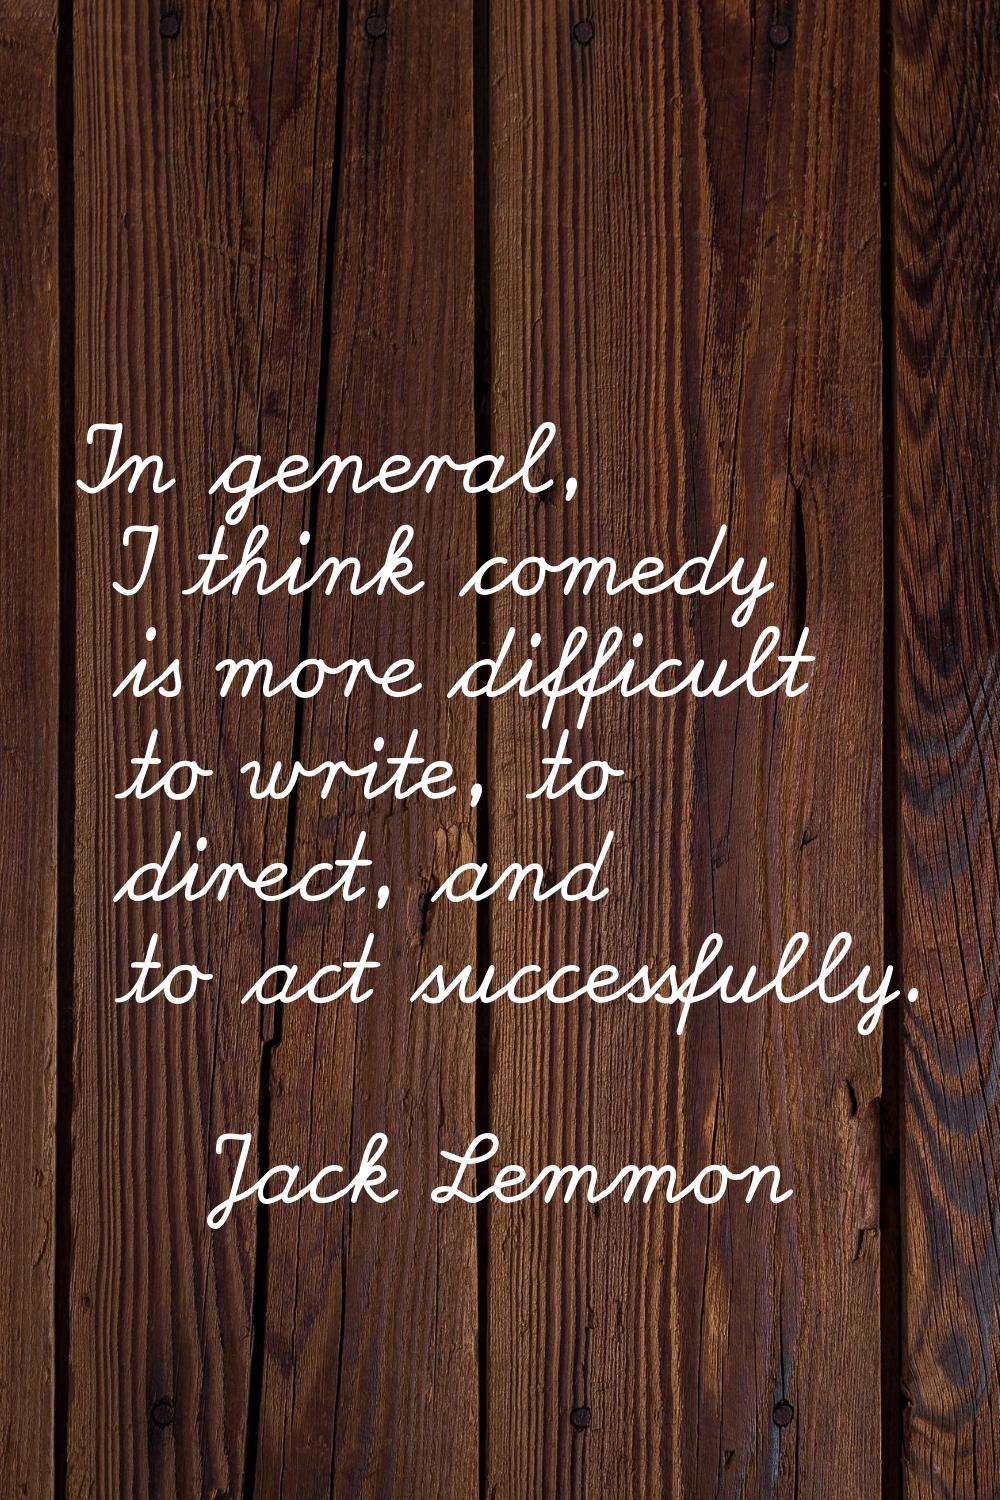 In general, I think comedy is more difficult to write, to direct, and to act successfully.